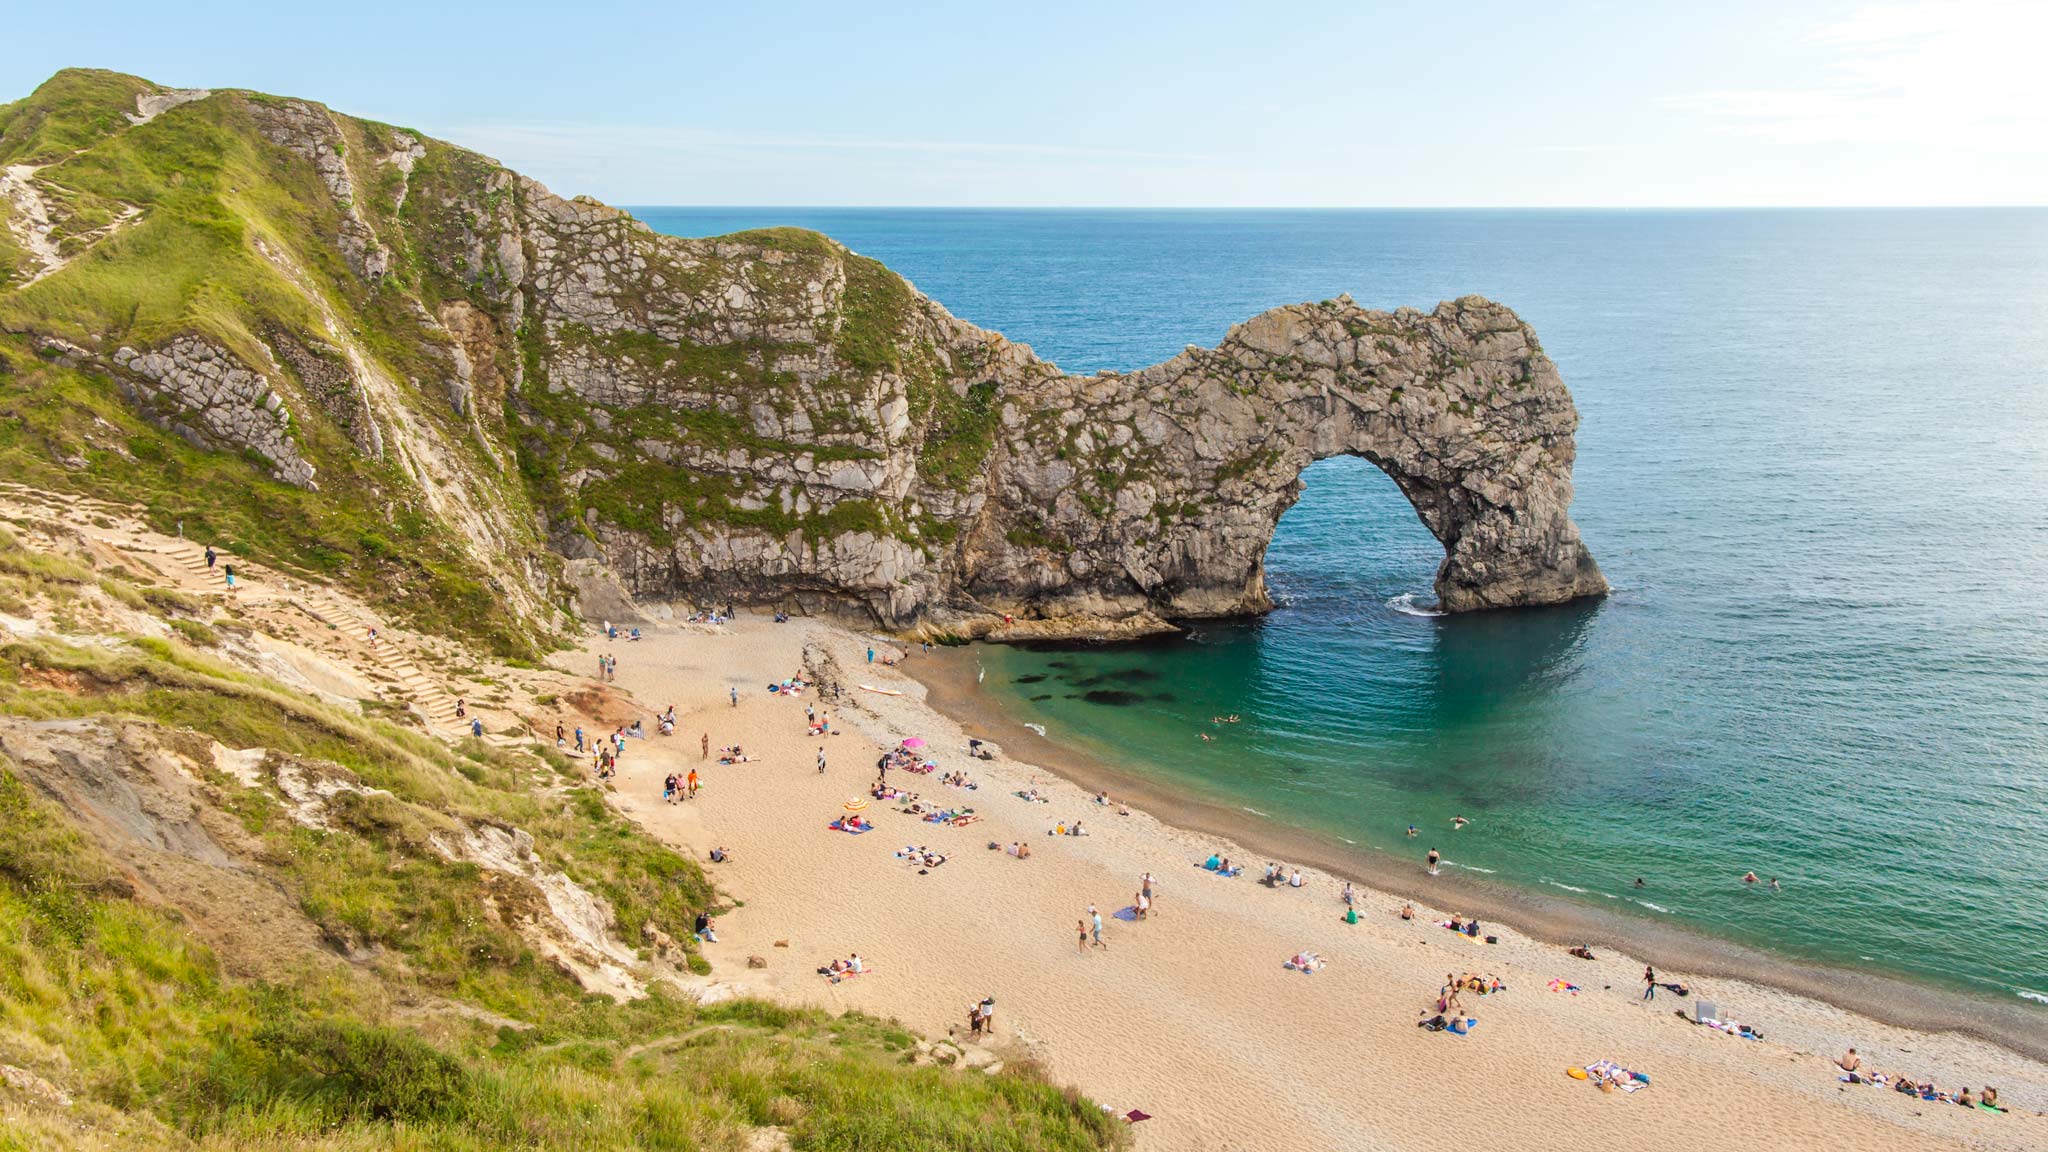 Beautiful Durdle Door, surrounded by 150 million years of history